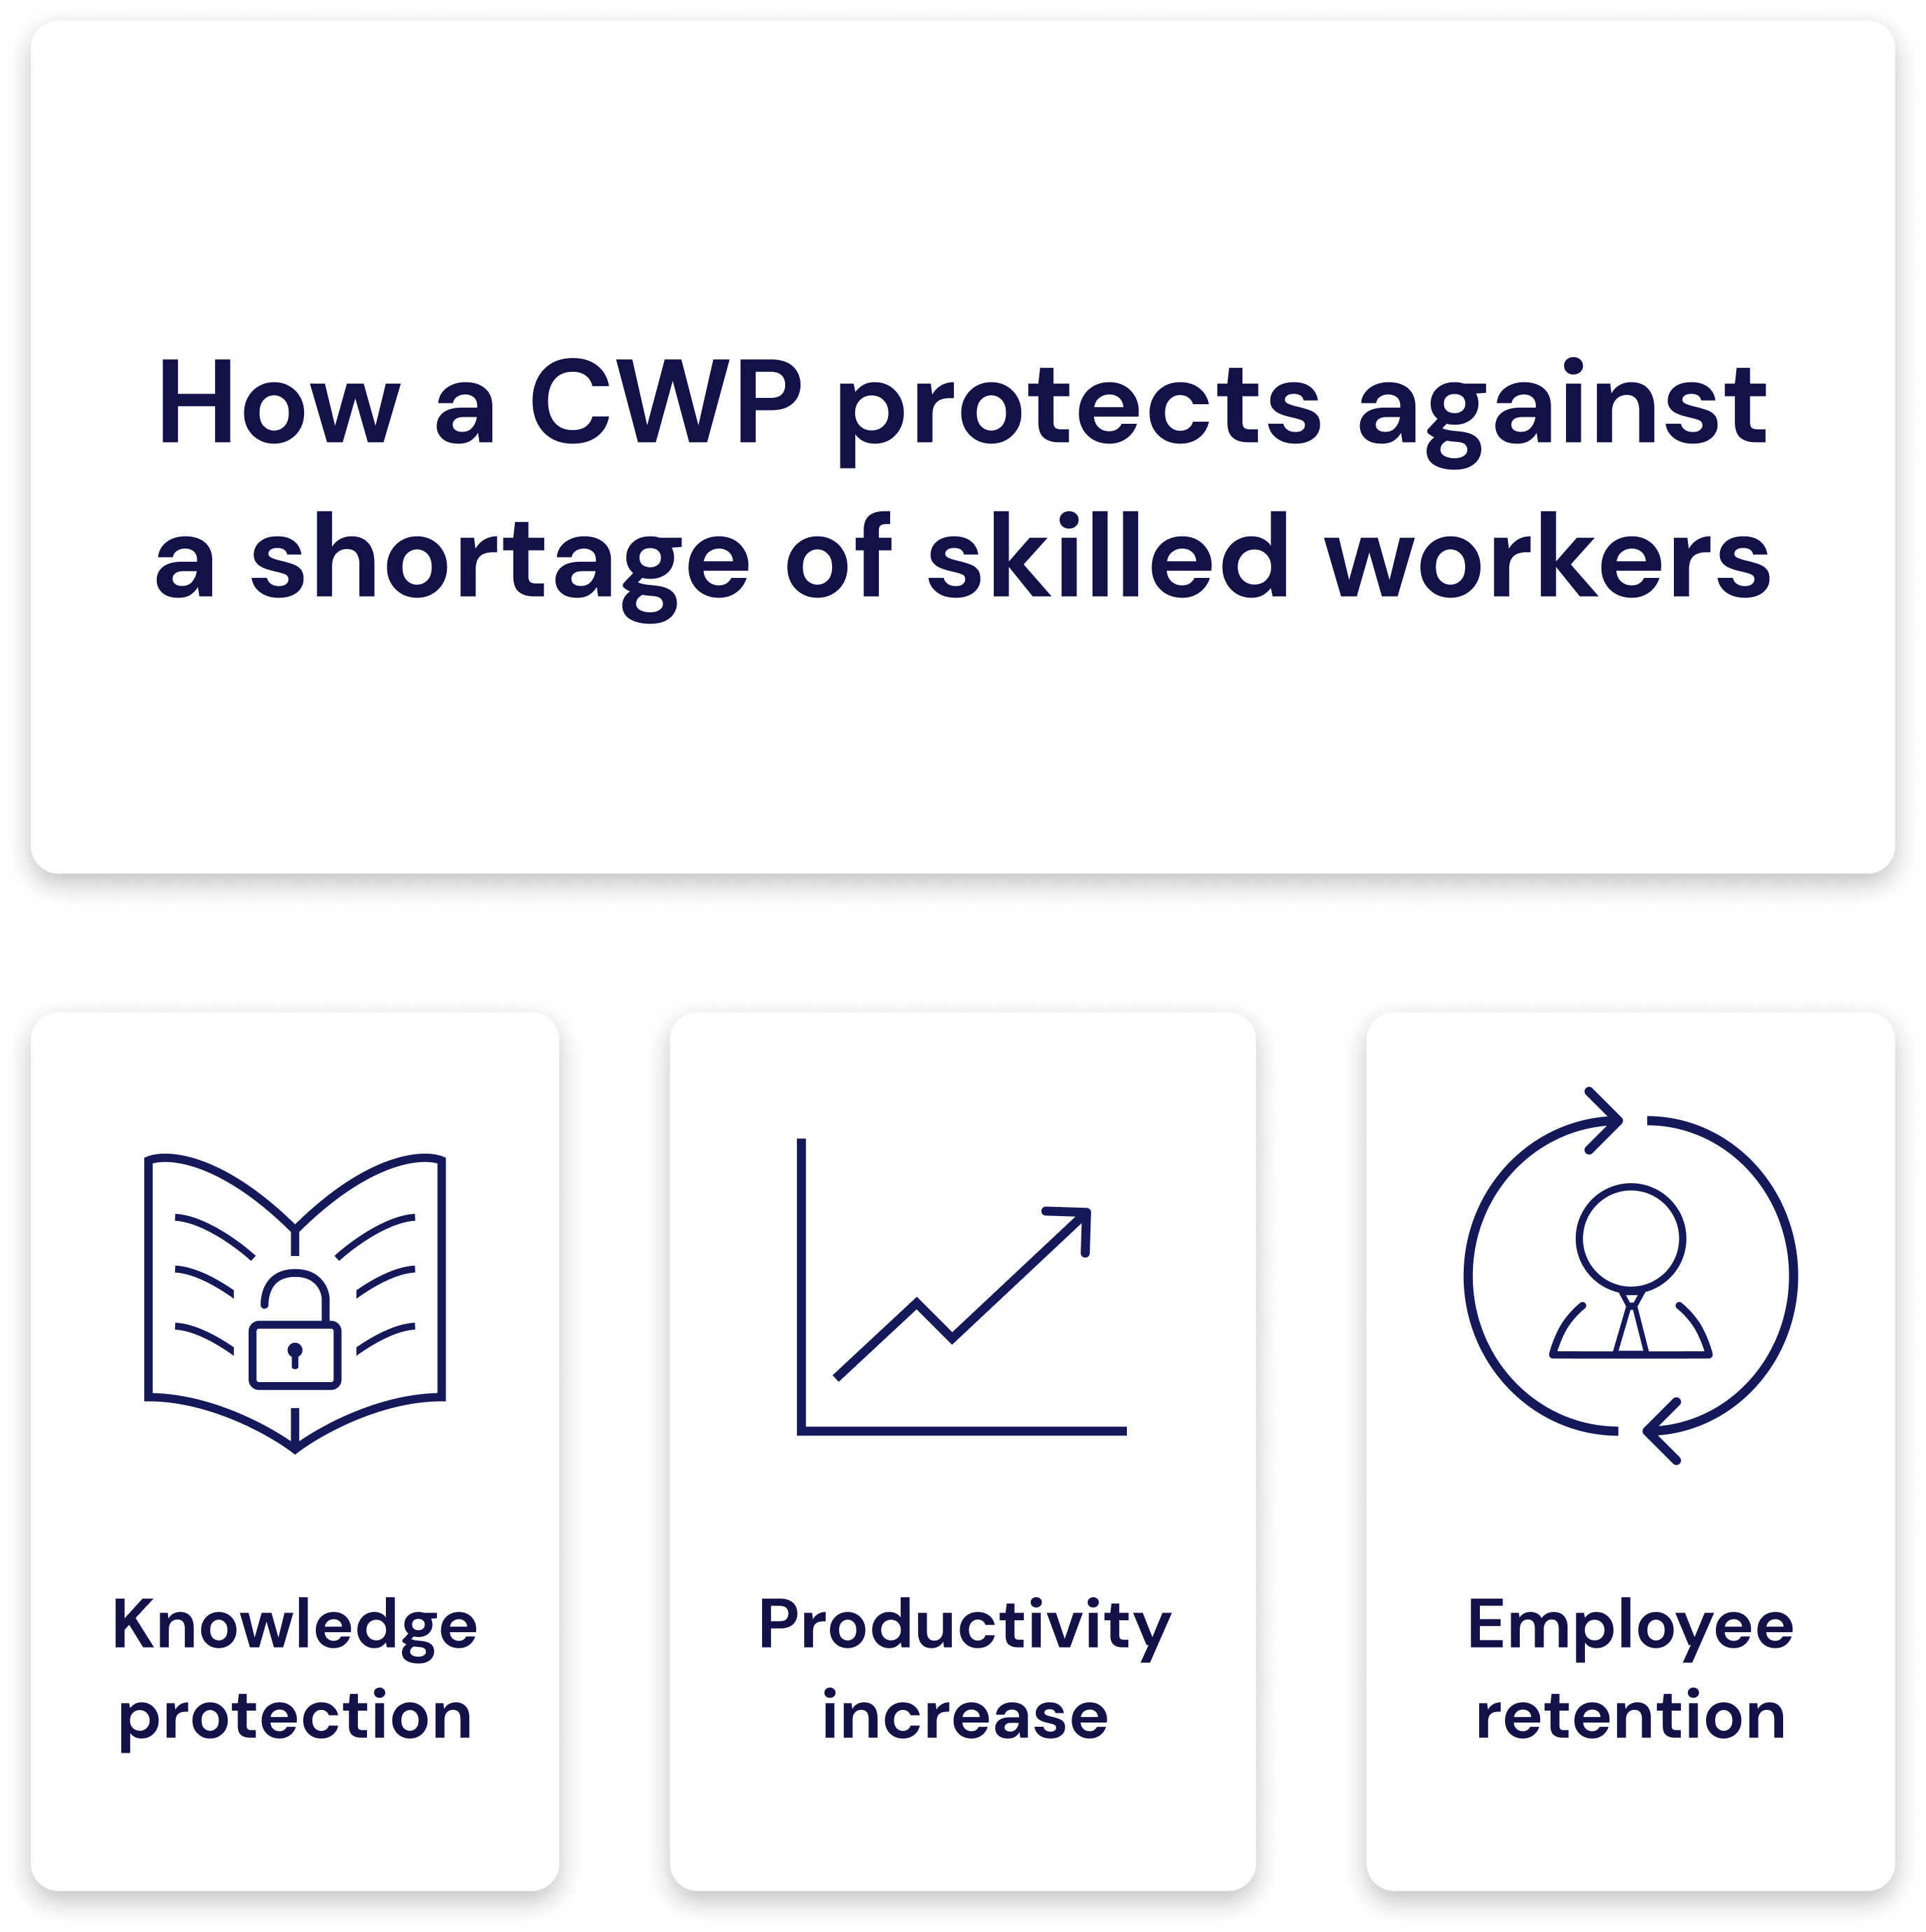 How a Connected Worker Platform protects against skills shortages